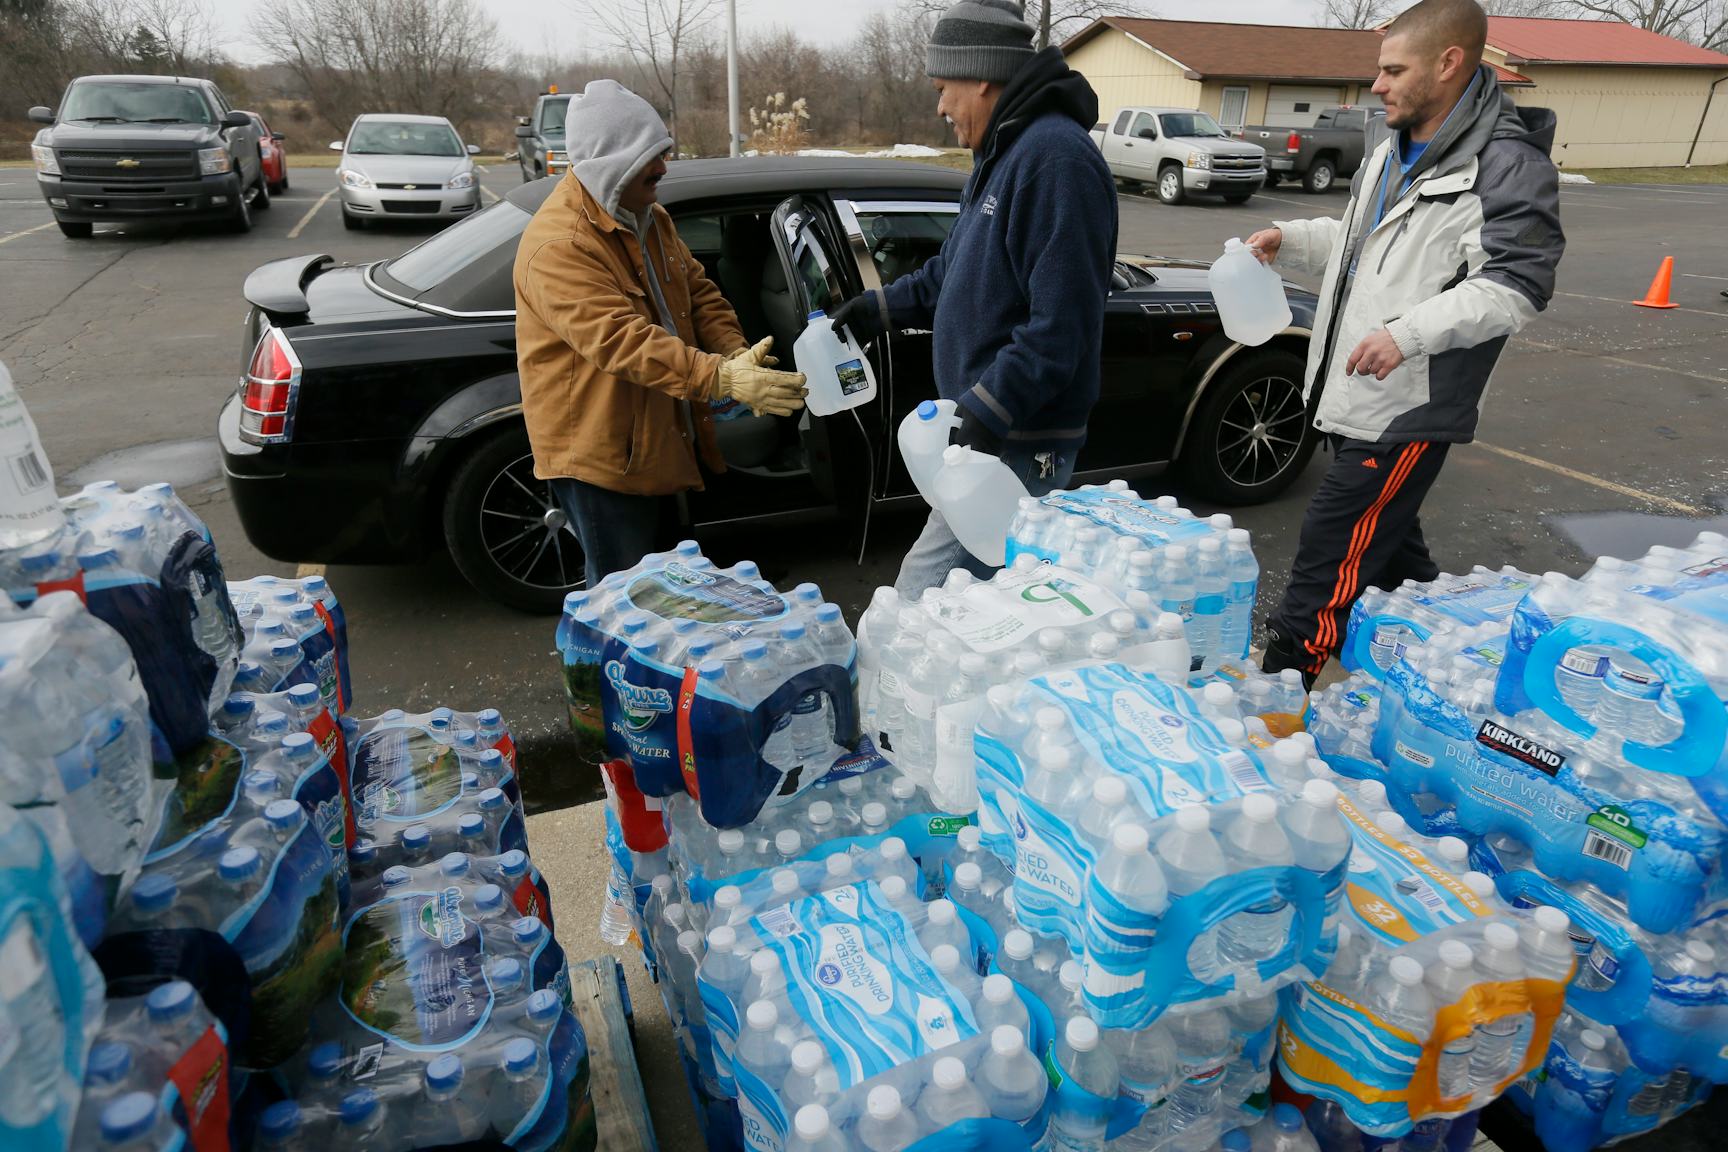 Flint, Michigan, residents call for help, say the water crisis is far